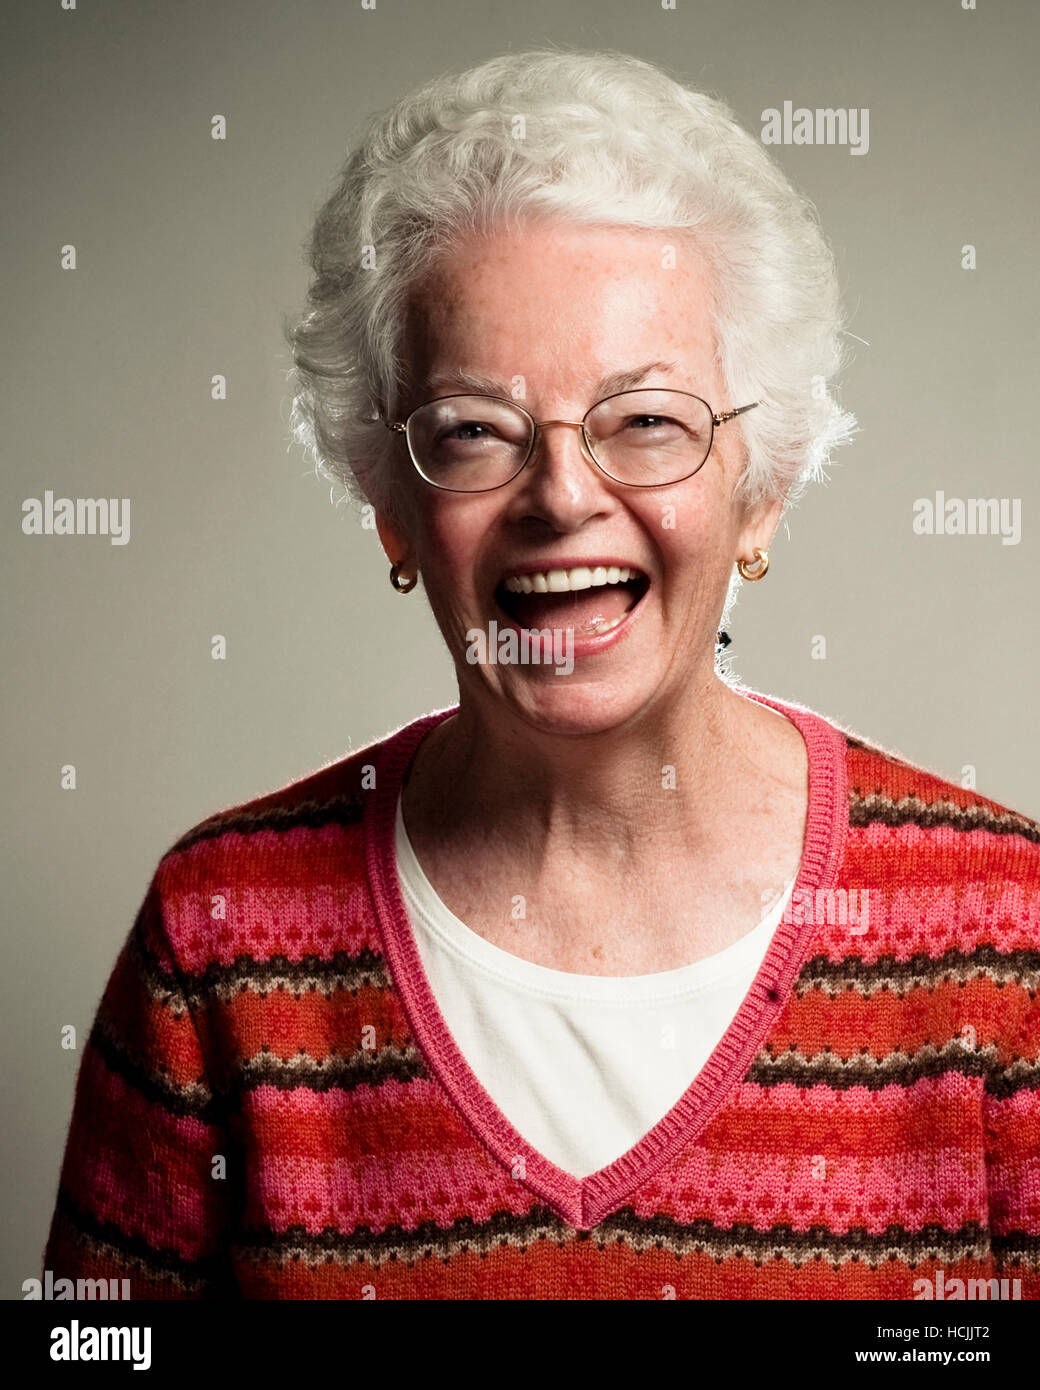 A studio portrait of a joyous silver-haired lady. Stock Photo